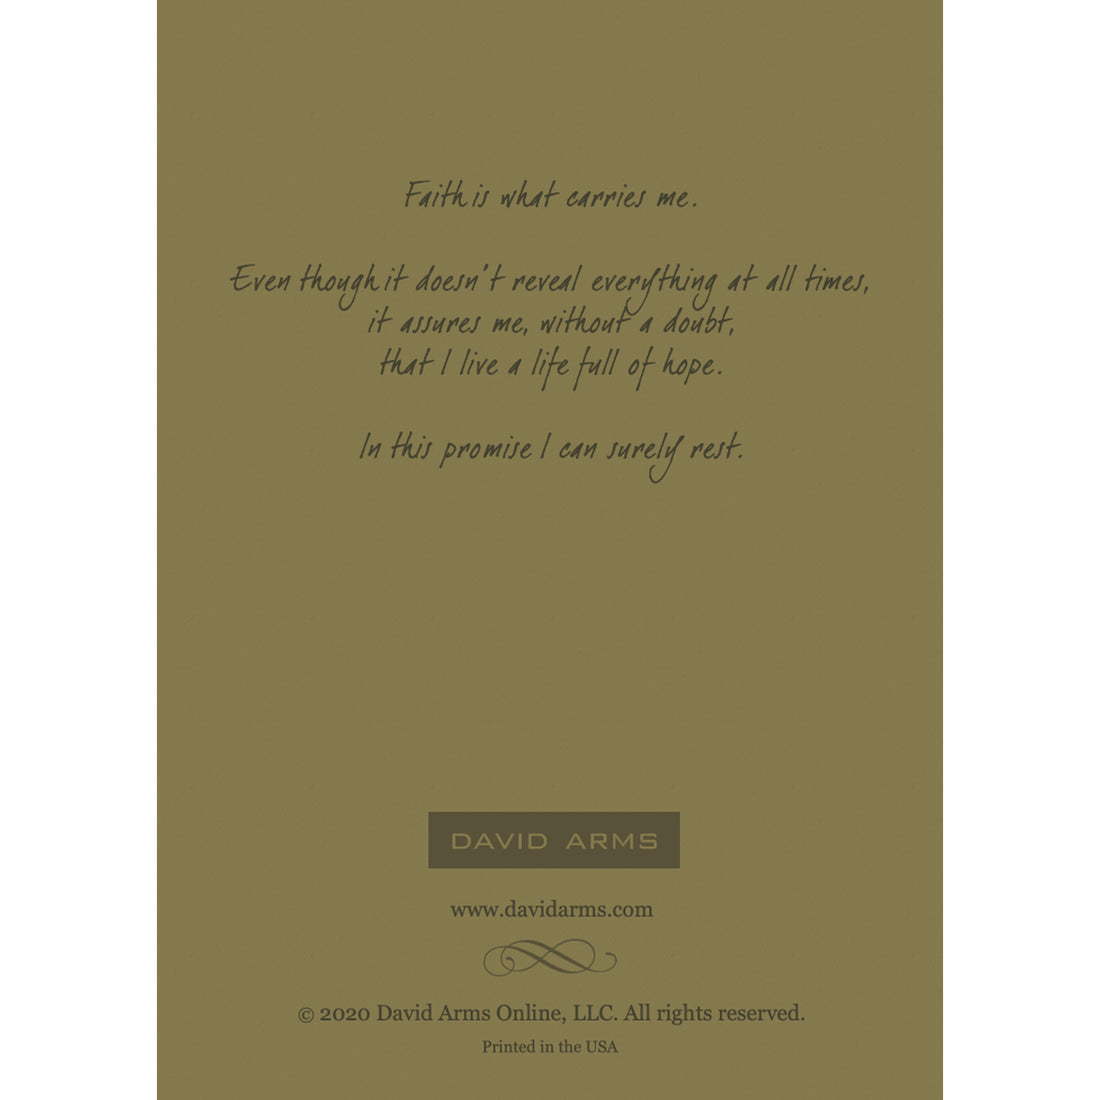 The olive-green back side of the greeting card, featuring a quote by artist David Arms.